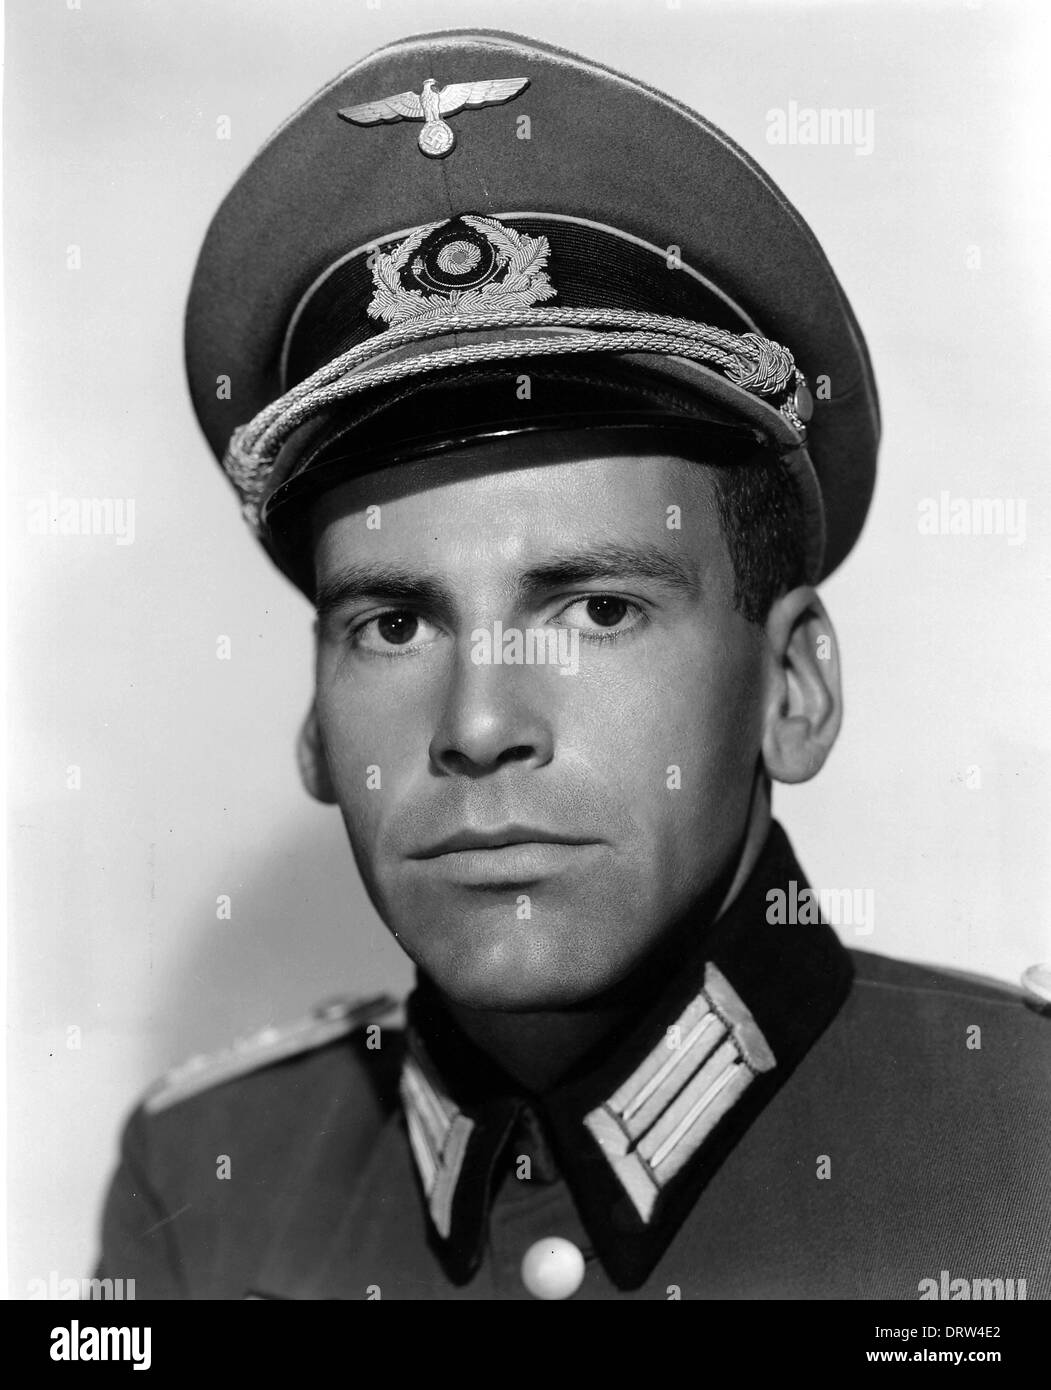 Austrian actor Maximilian Schell, who won the Academy Award for best actor in 1961 for his portrayal of a defense attorney in the drama Judgment at Nuremberg, has died aged 83. The actor's death was announced Saturday by his agent, who said that Schell died overnight at a hospital in Innsbruck following a 'sudden and serious illness'. PICTURED: Date not known - MAXIMILIAN SCHELL. (Credit Image: © Globe Photos/ZUMAPRESS.com) Stock Photo